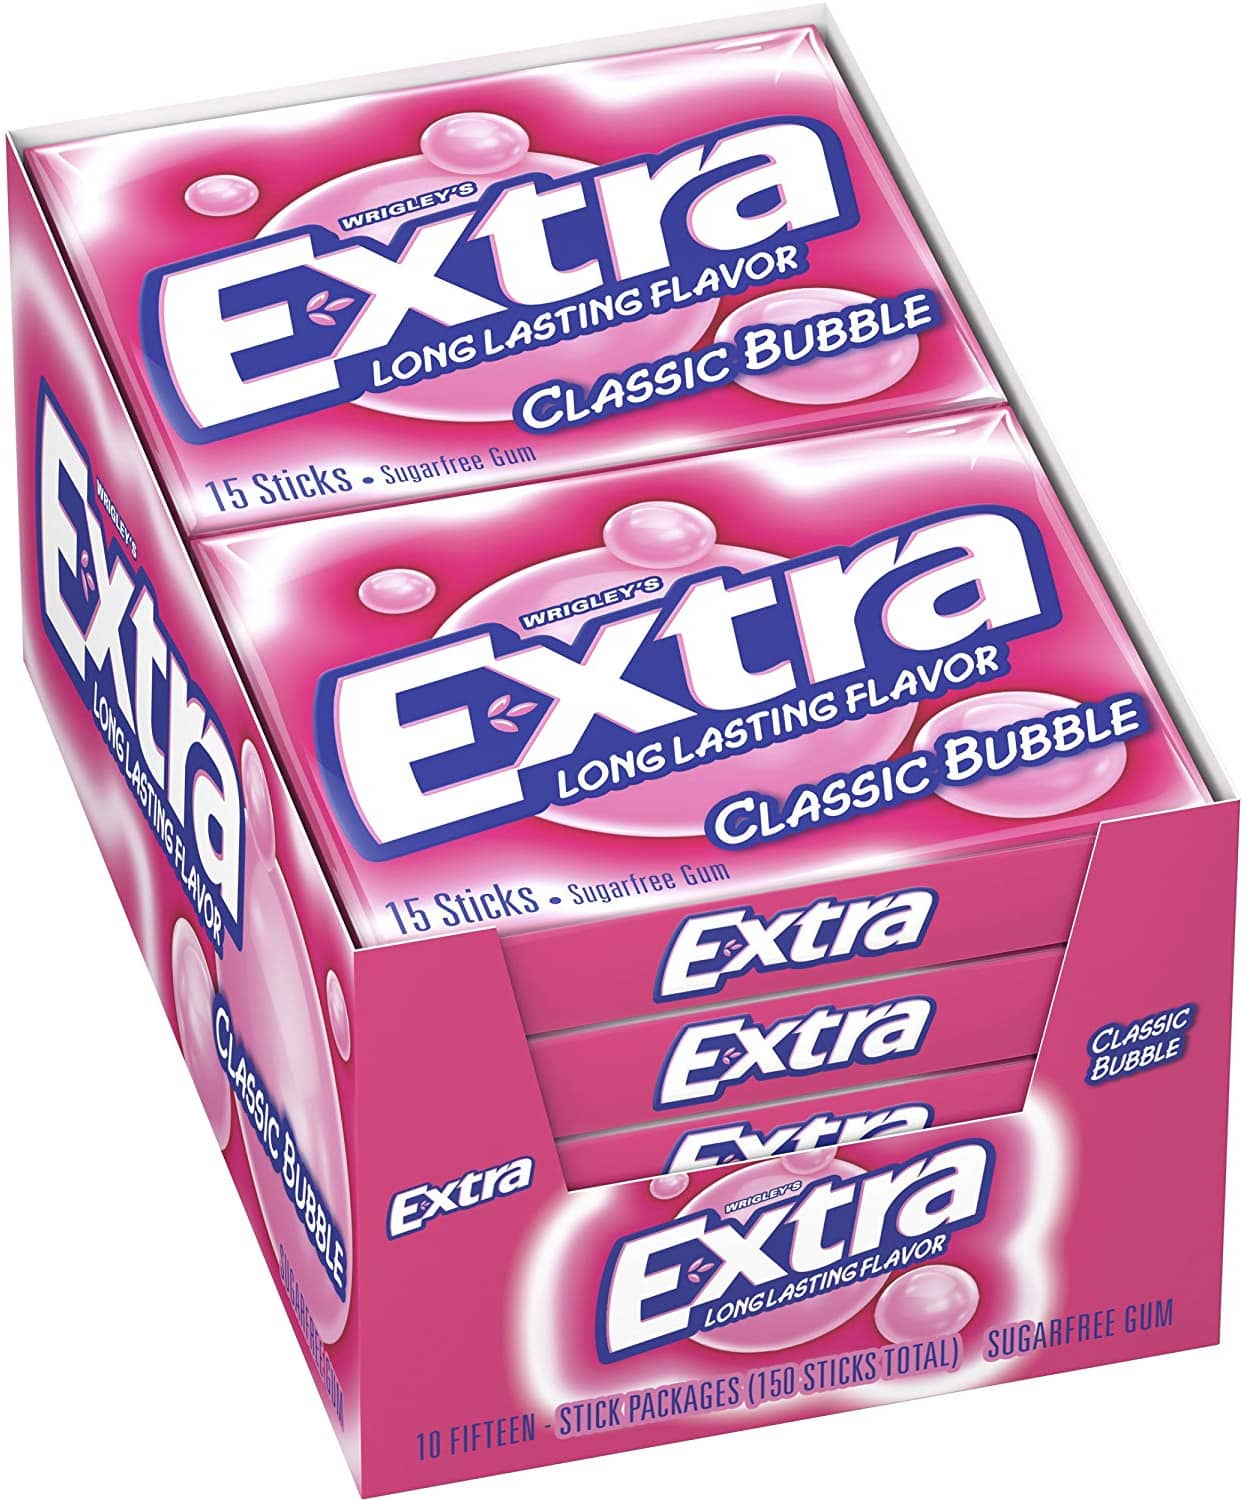 10x Extra Classic Bubble Sugarfree Chewing Gum Long Lasting Flavor FREE ...